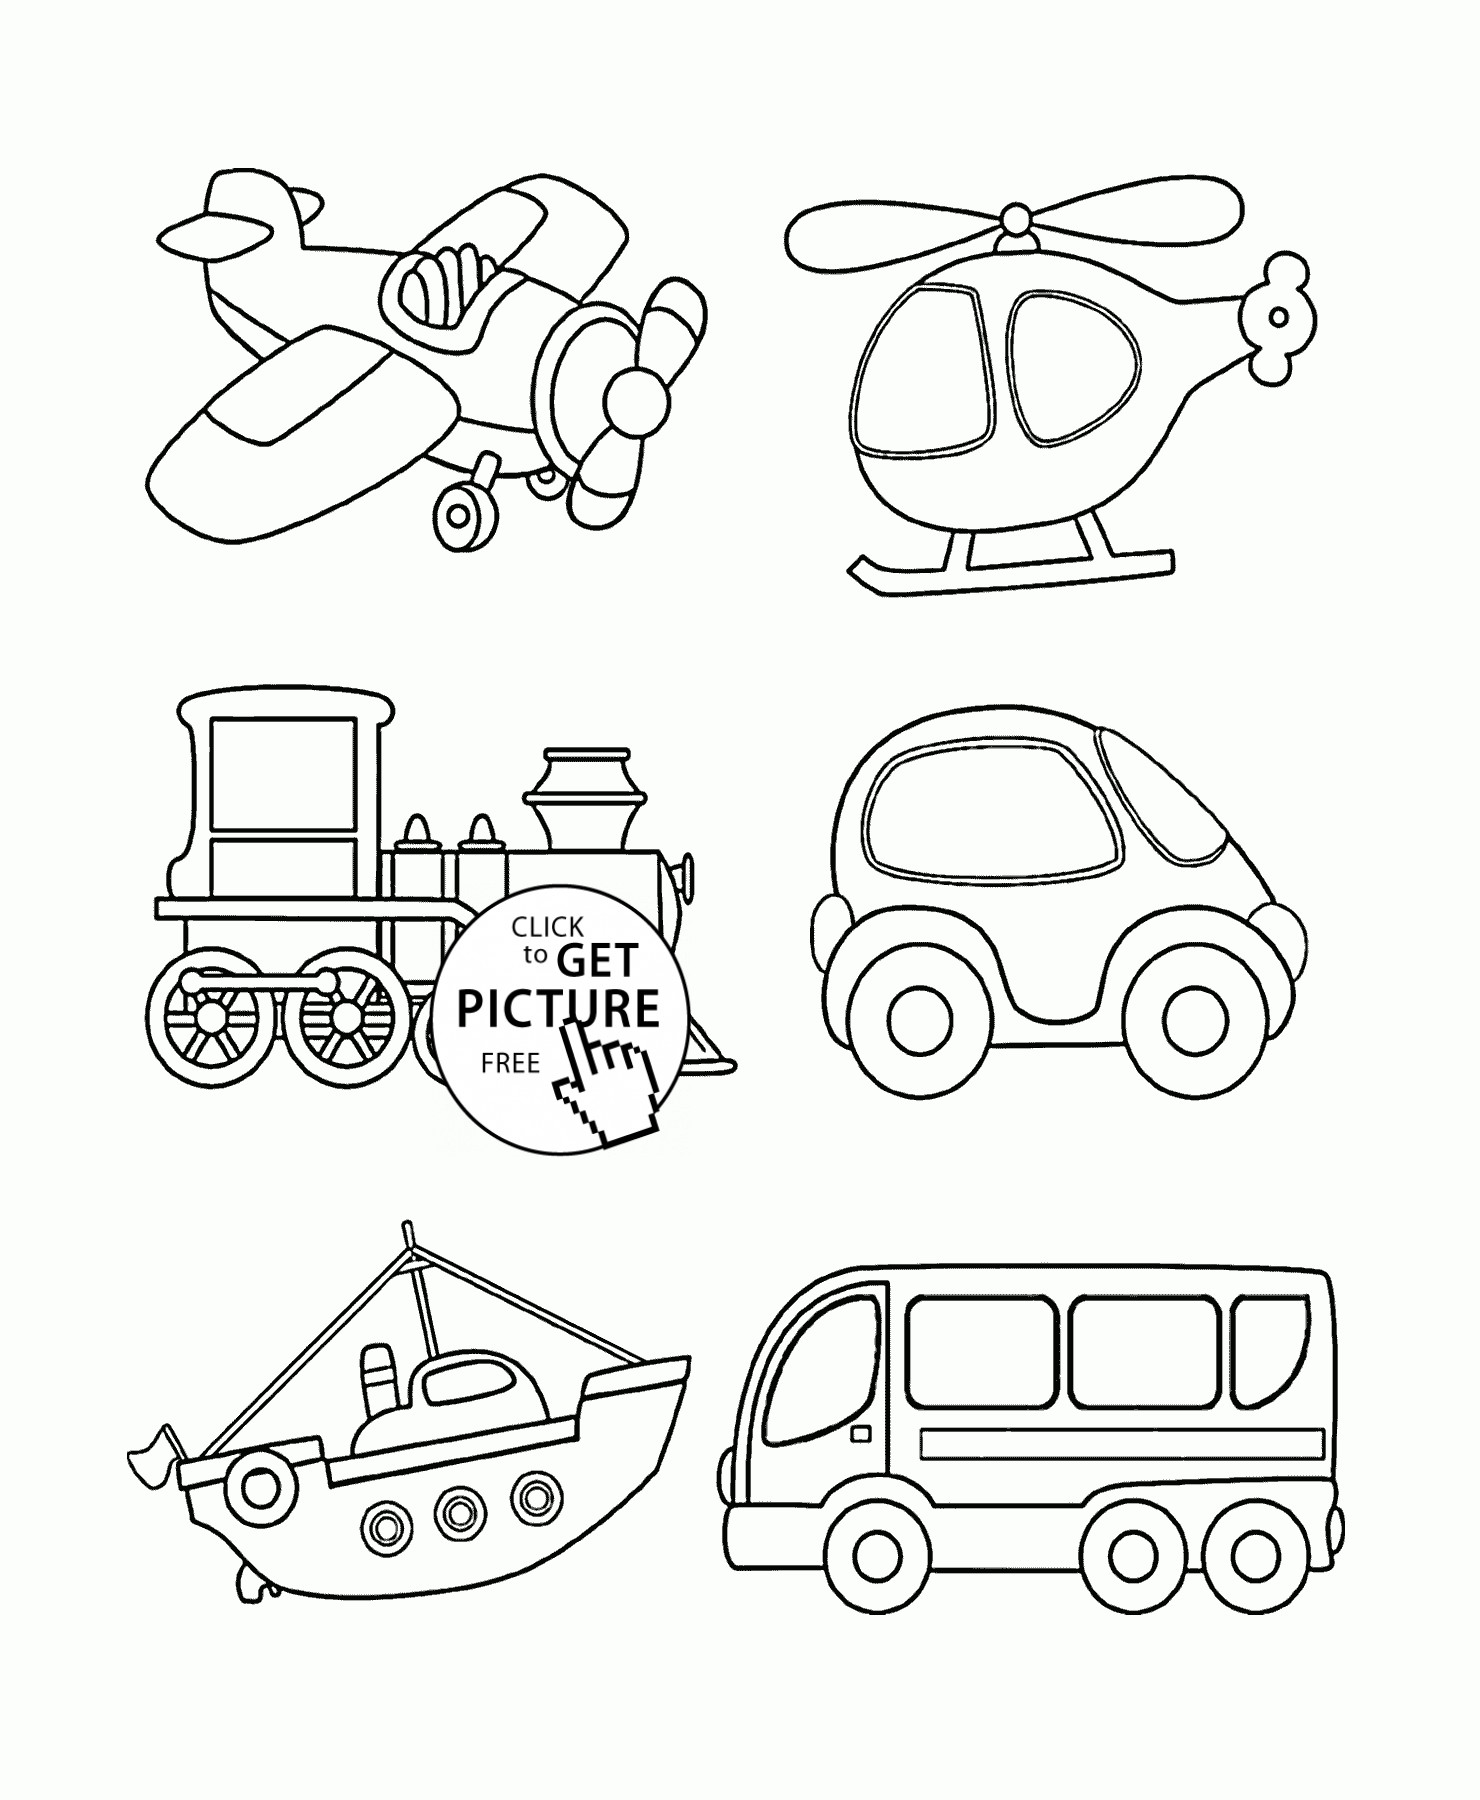 Transportation Coloring Pages For Toddlers
 Transportation coloring page for toddlers coloring pages